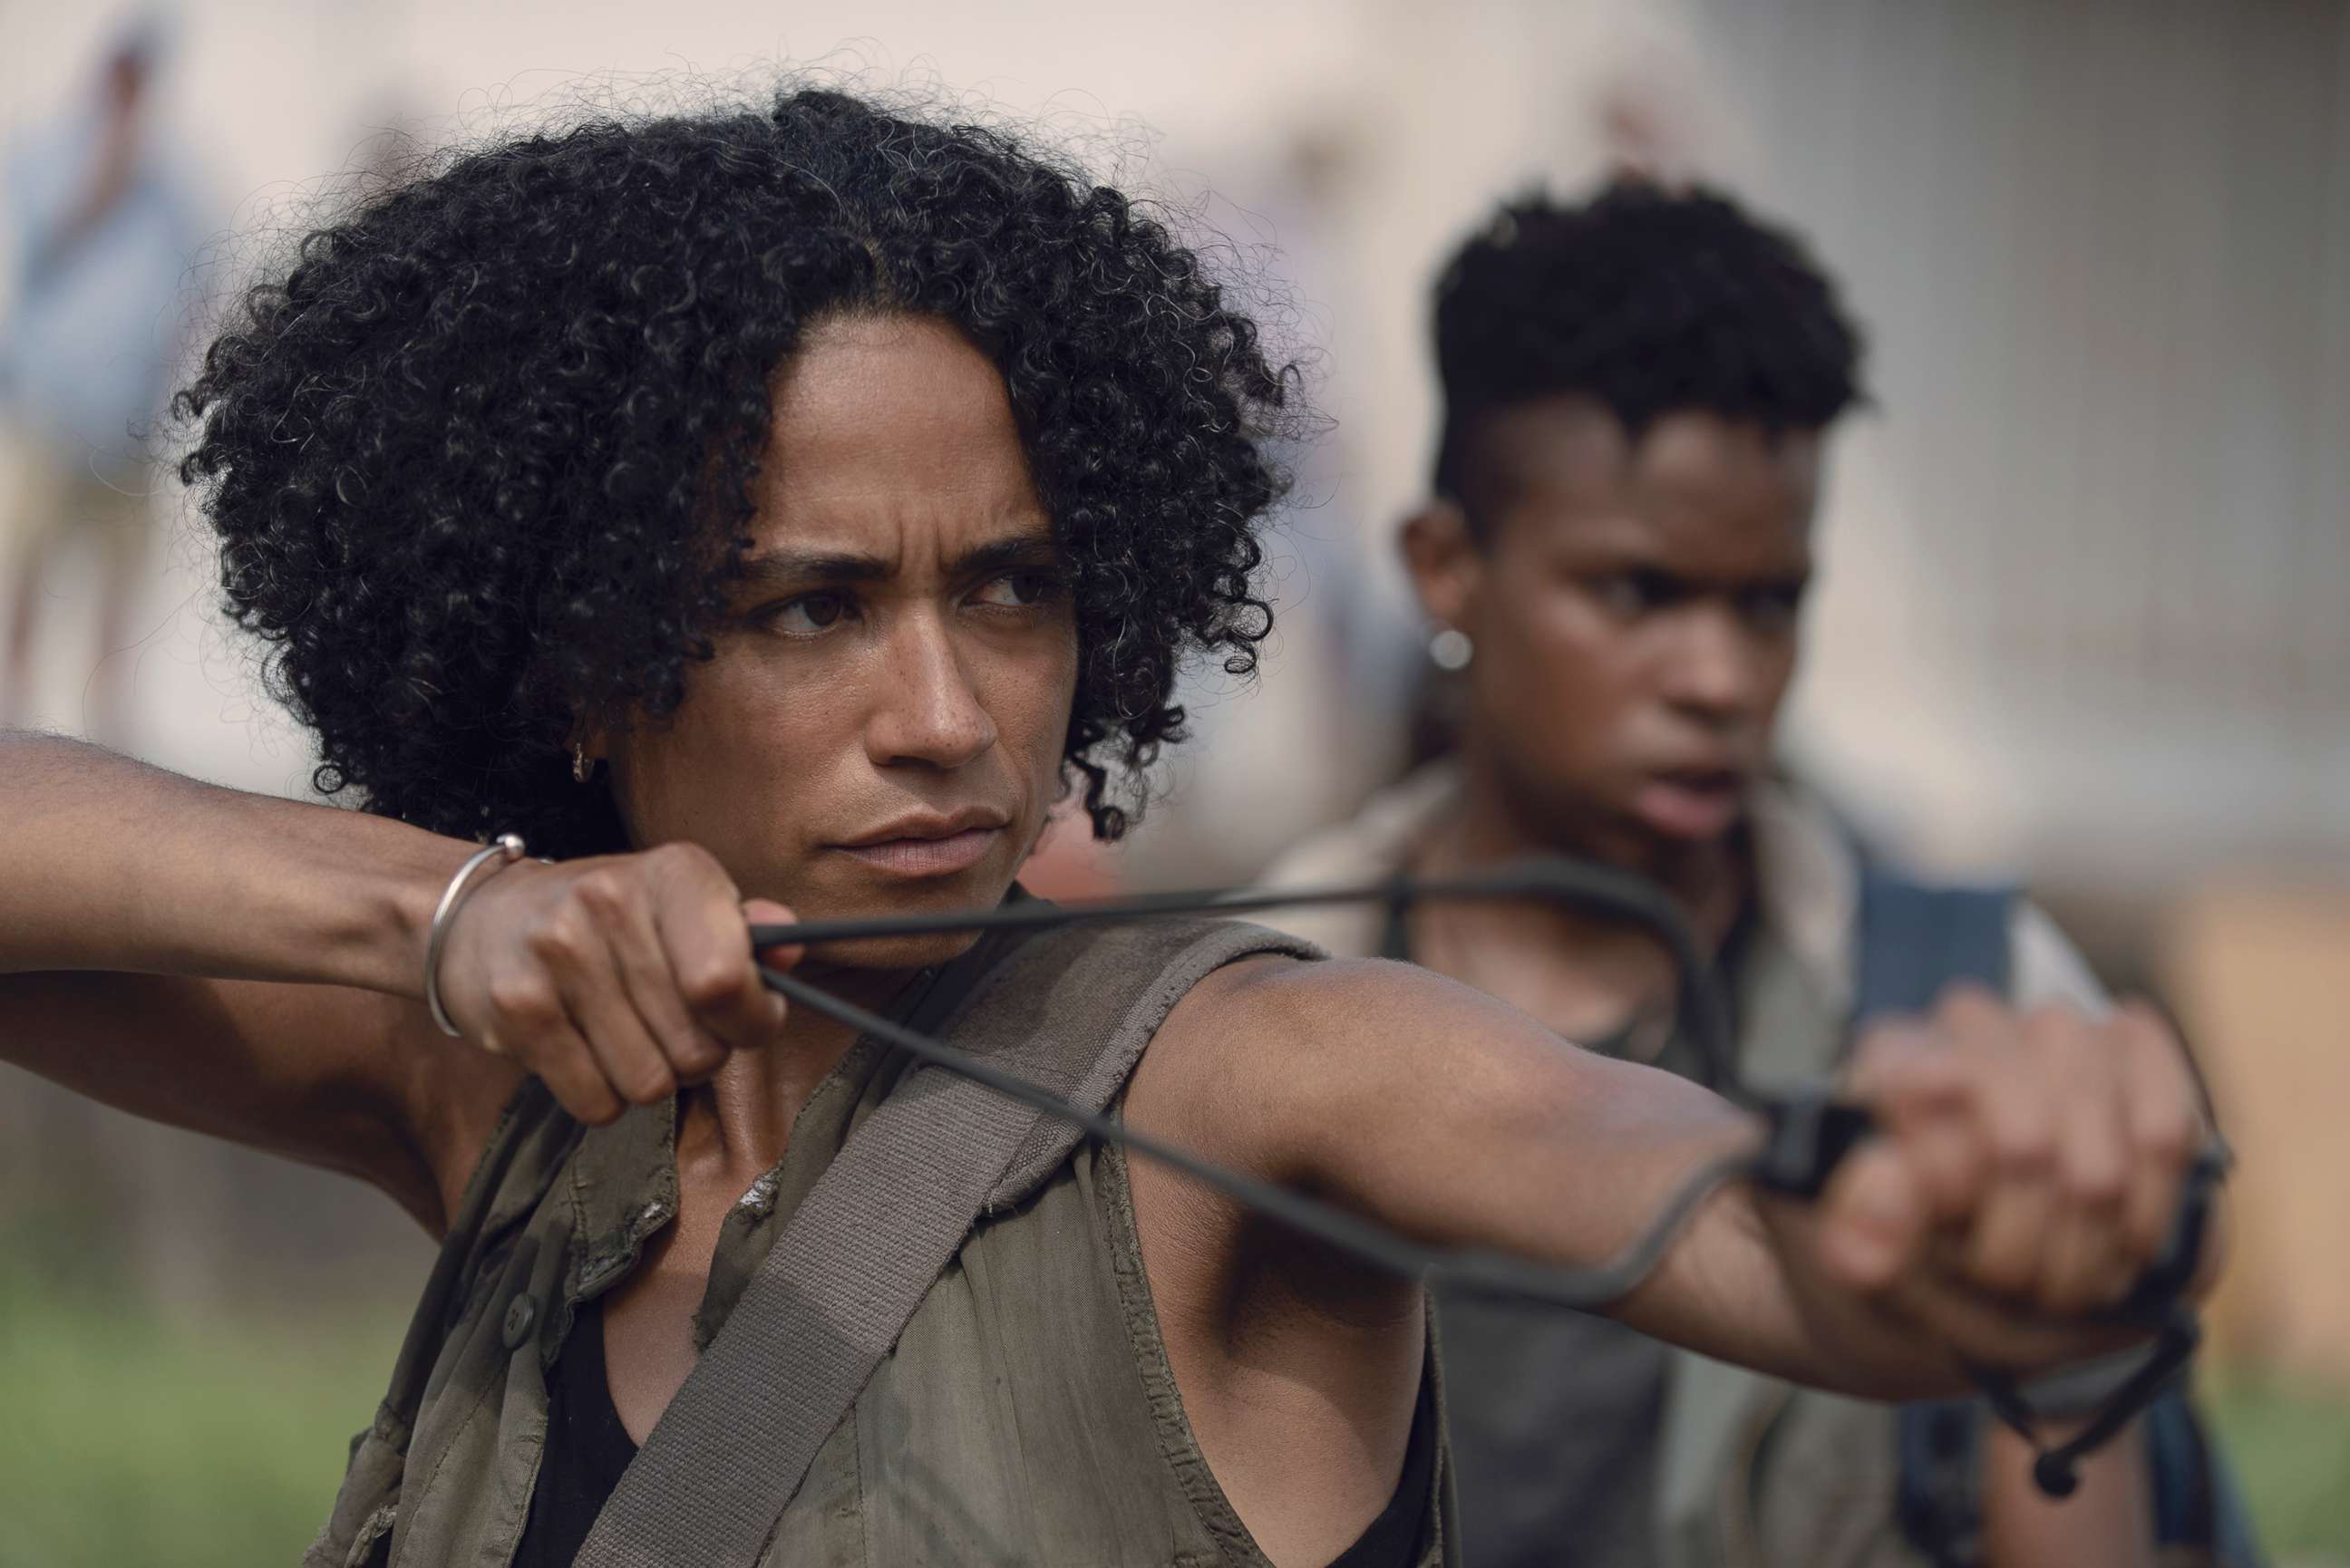 PHOTO: Lauren Ridloff as Connie in a scene from "The Walking Dead."